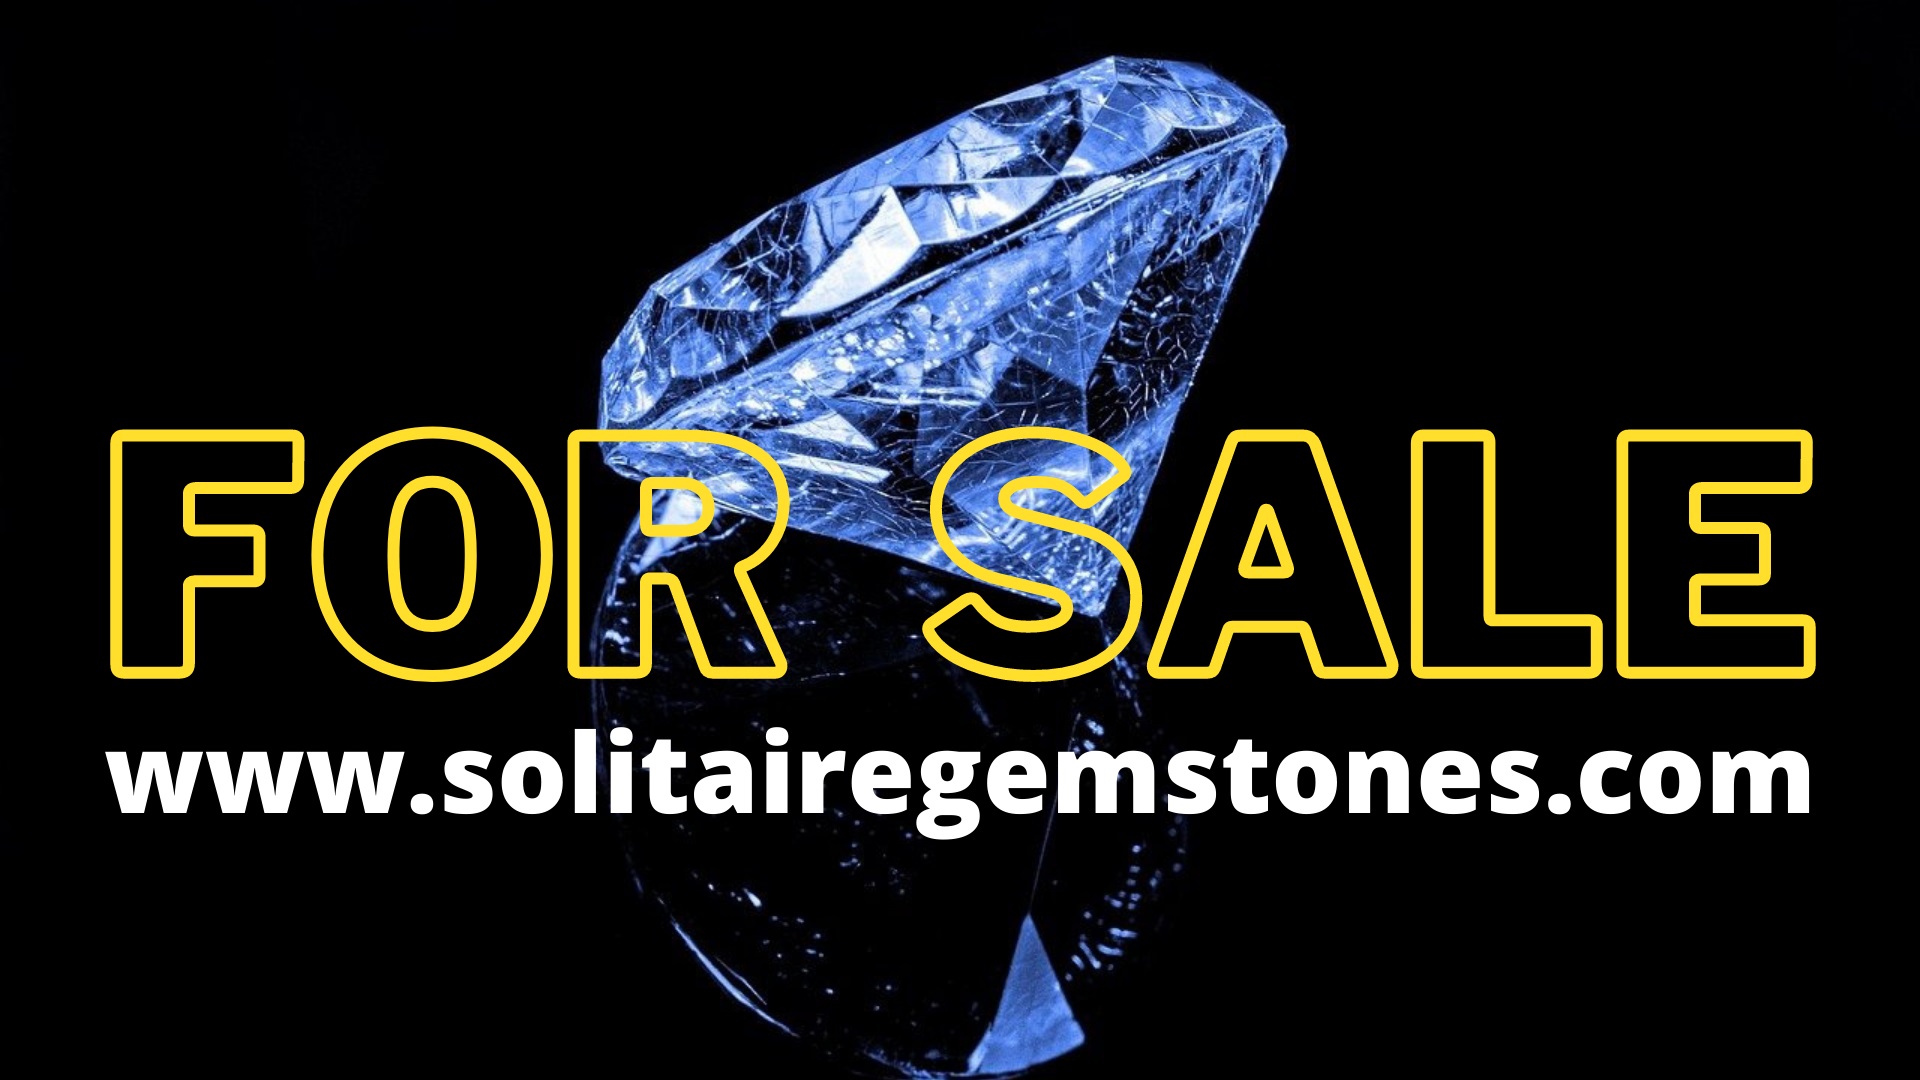 Massive real diamond on black background with text solitairegemstones.com is for sale